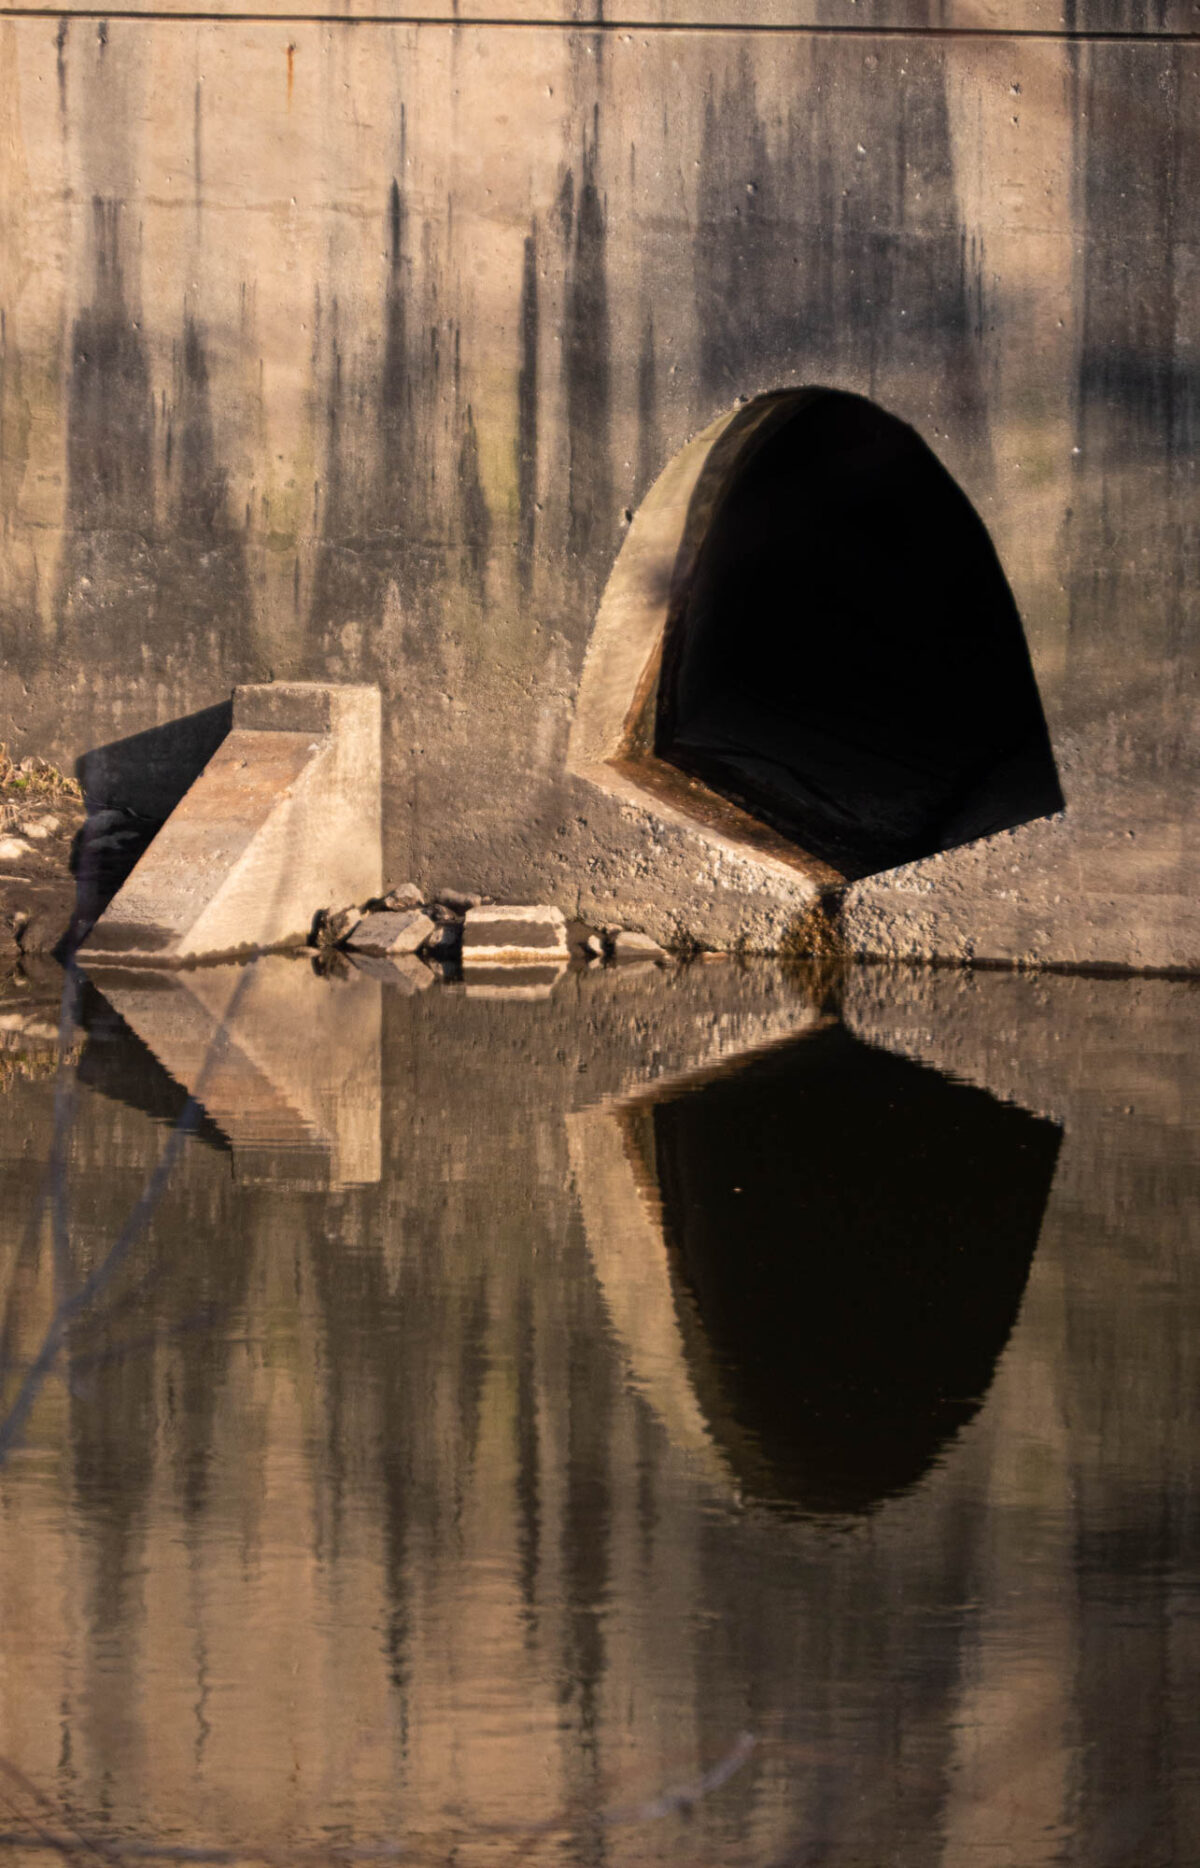 Reflection of storm water outlet